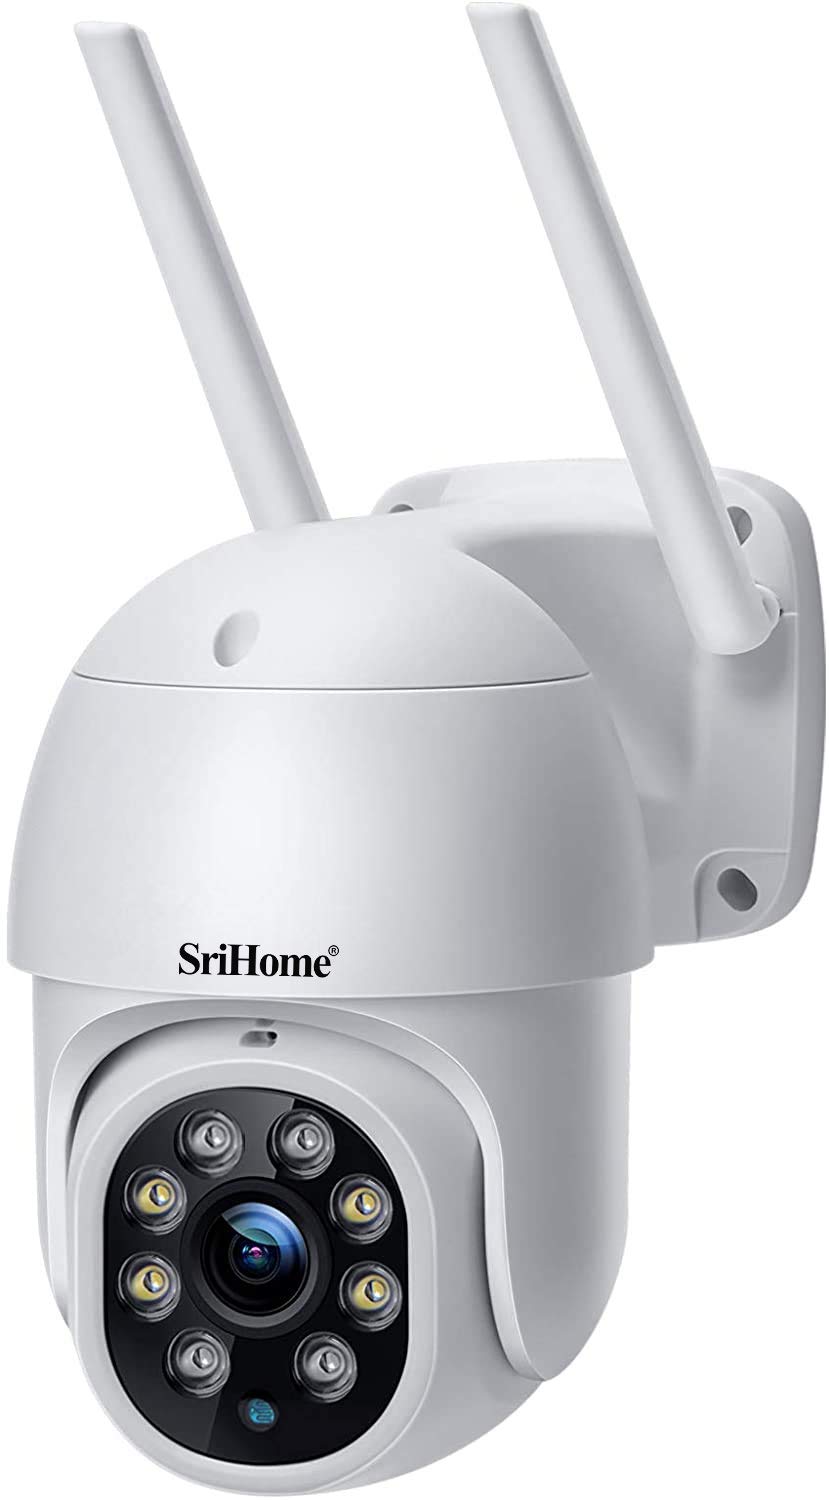 Srihome SP028 Pan/Tilt Wireless WiFi 2MP Full HD 1080p Waterproof Security Camera CCTV with Auto Tracking & 2 Way Audio